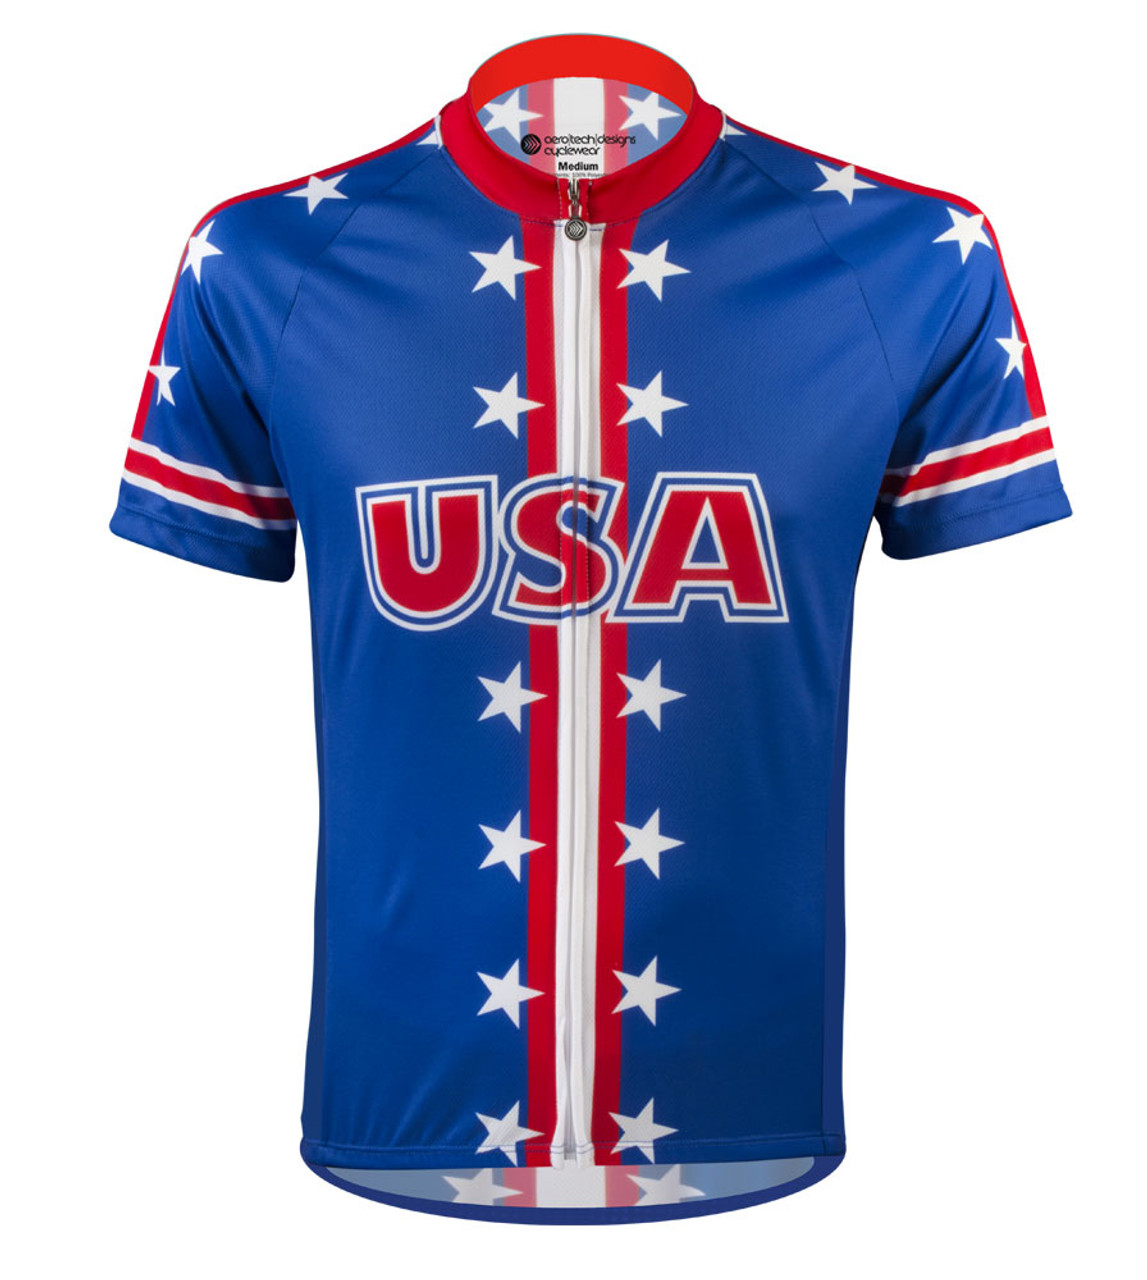 USA Cycling Jersey in Red White and Blue with back pockets and ...